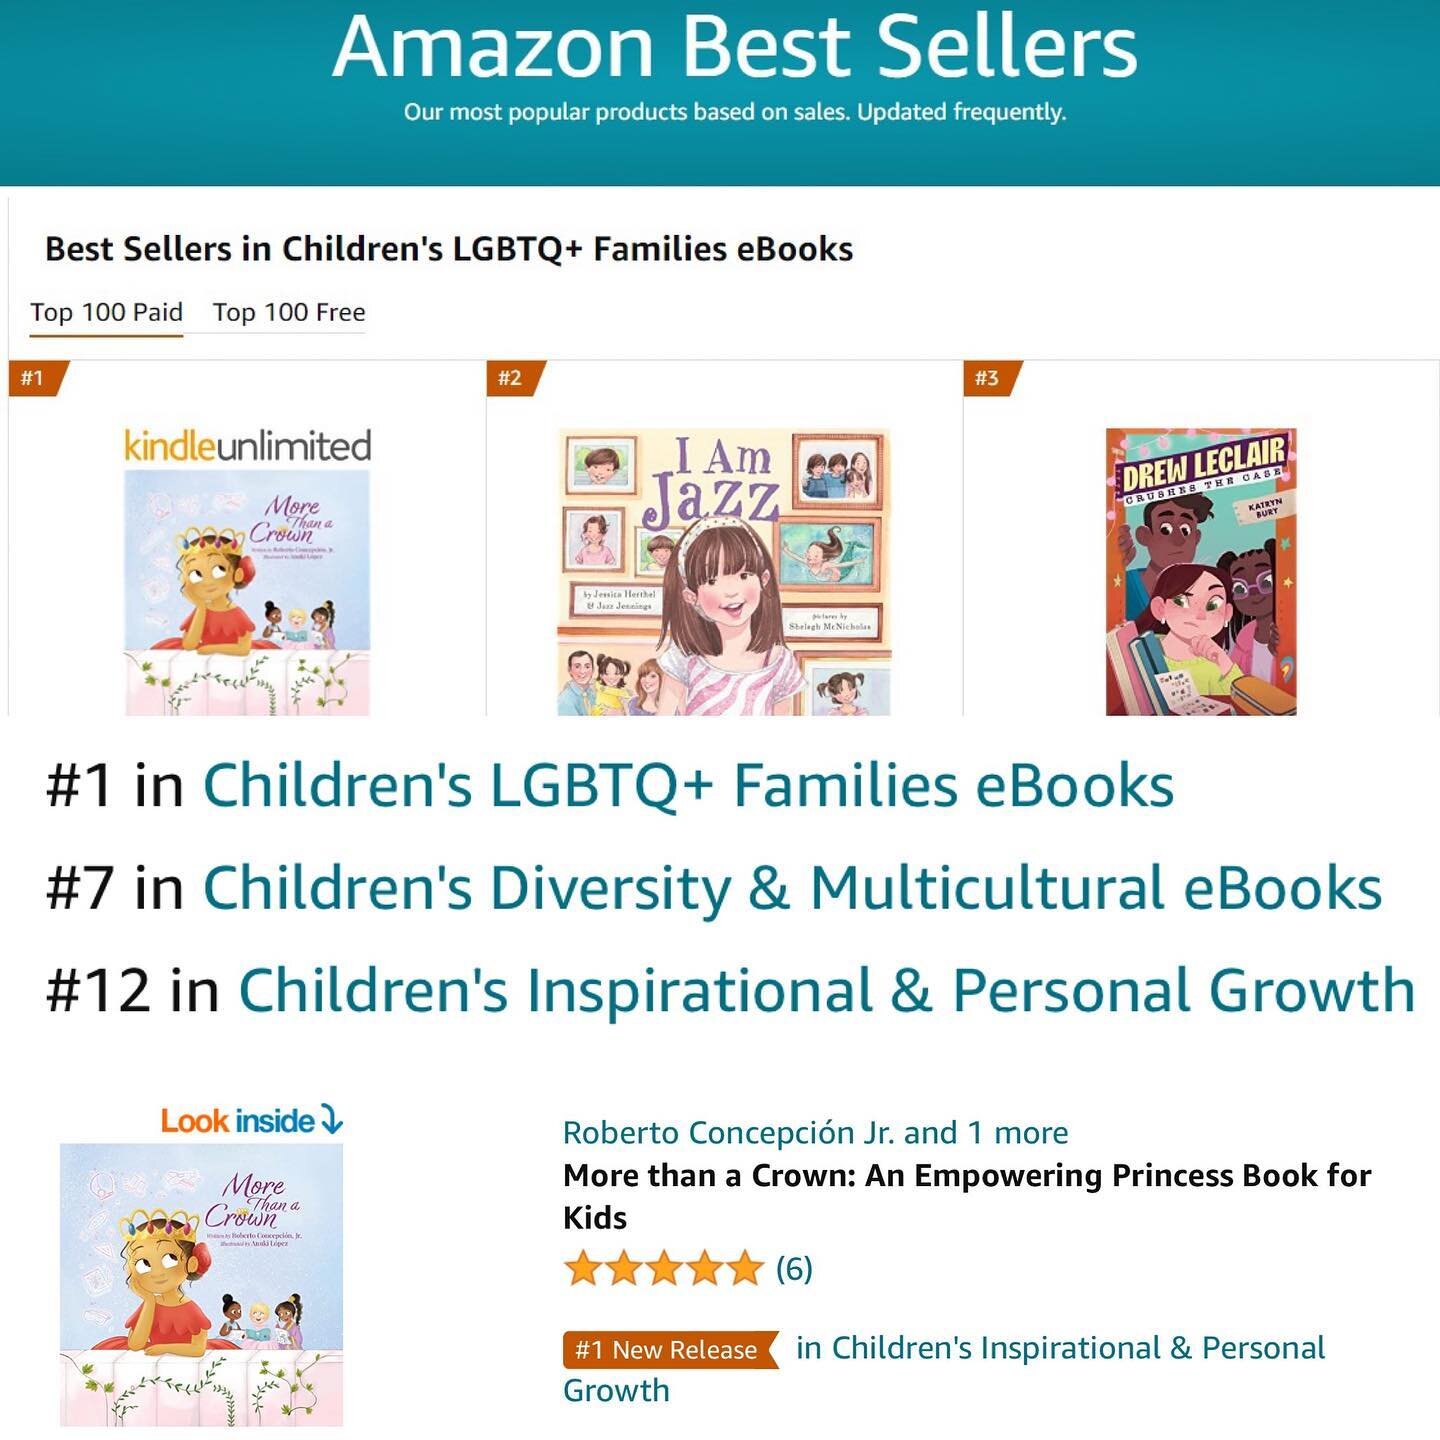 Sharing more good news from the weekend 📣. &ldquo;More Than a Crown&rdquo; was a #1 New Release in Children&rsquo;s Inspirational &amp; Personal Growth, and topped the Amazon best sellers list in a few more categories! 🏆 
#1 in LGBTQ+ Families eBoo